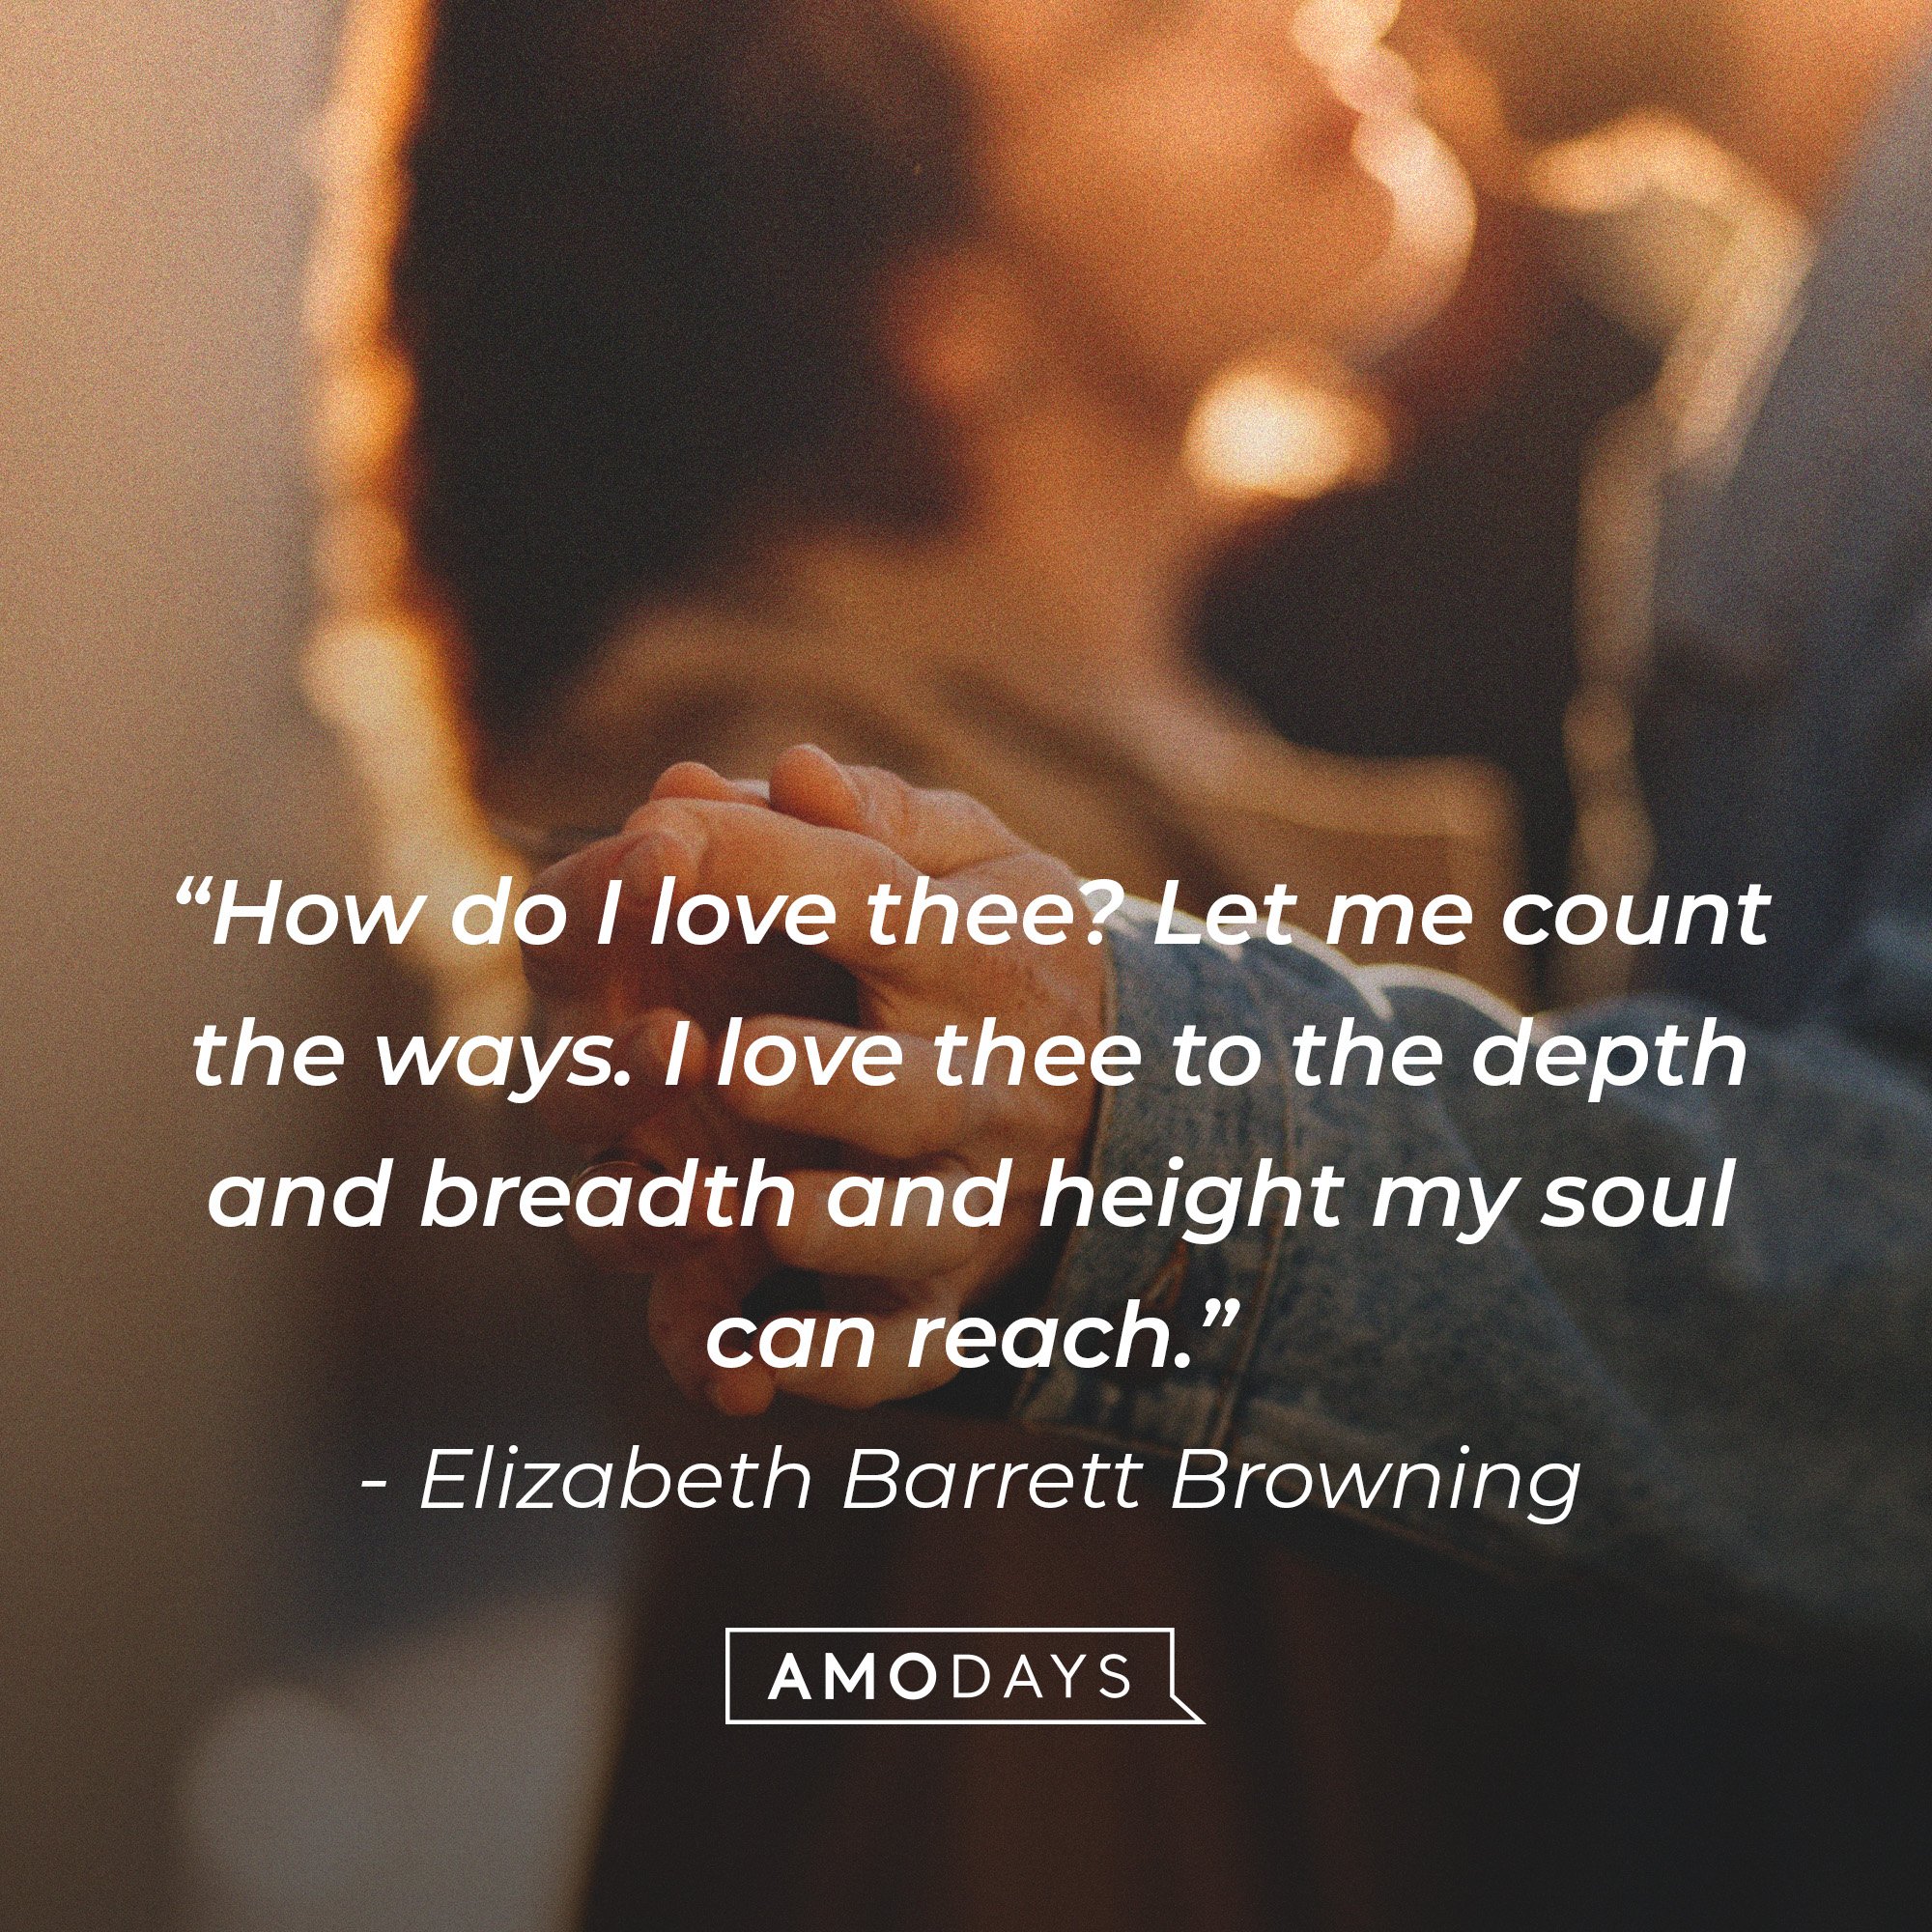  Elizabeth Barrett Browning's quote:  “How do I love thee? Let me count the ways. I love thee to the depth and breadth and height my soul can reach.” | Image: AmoDays